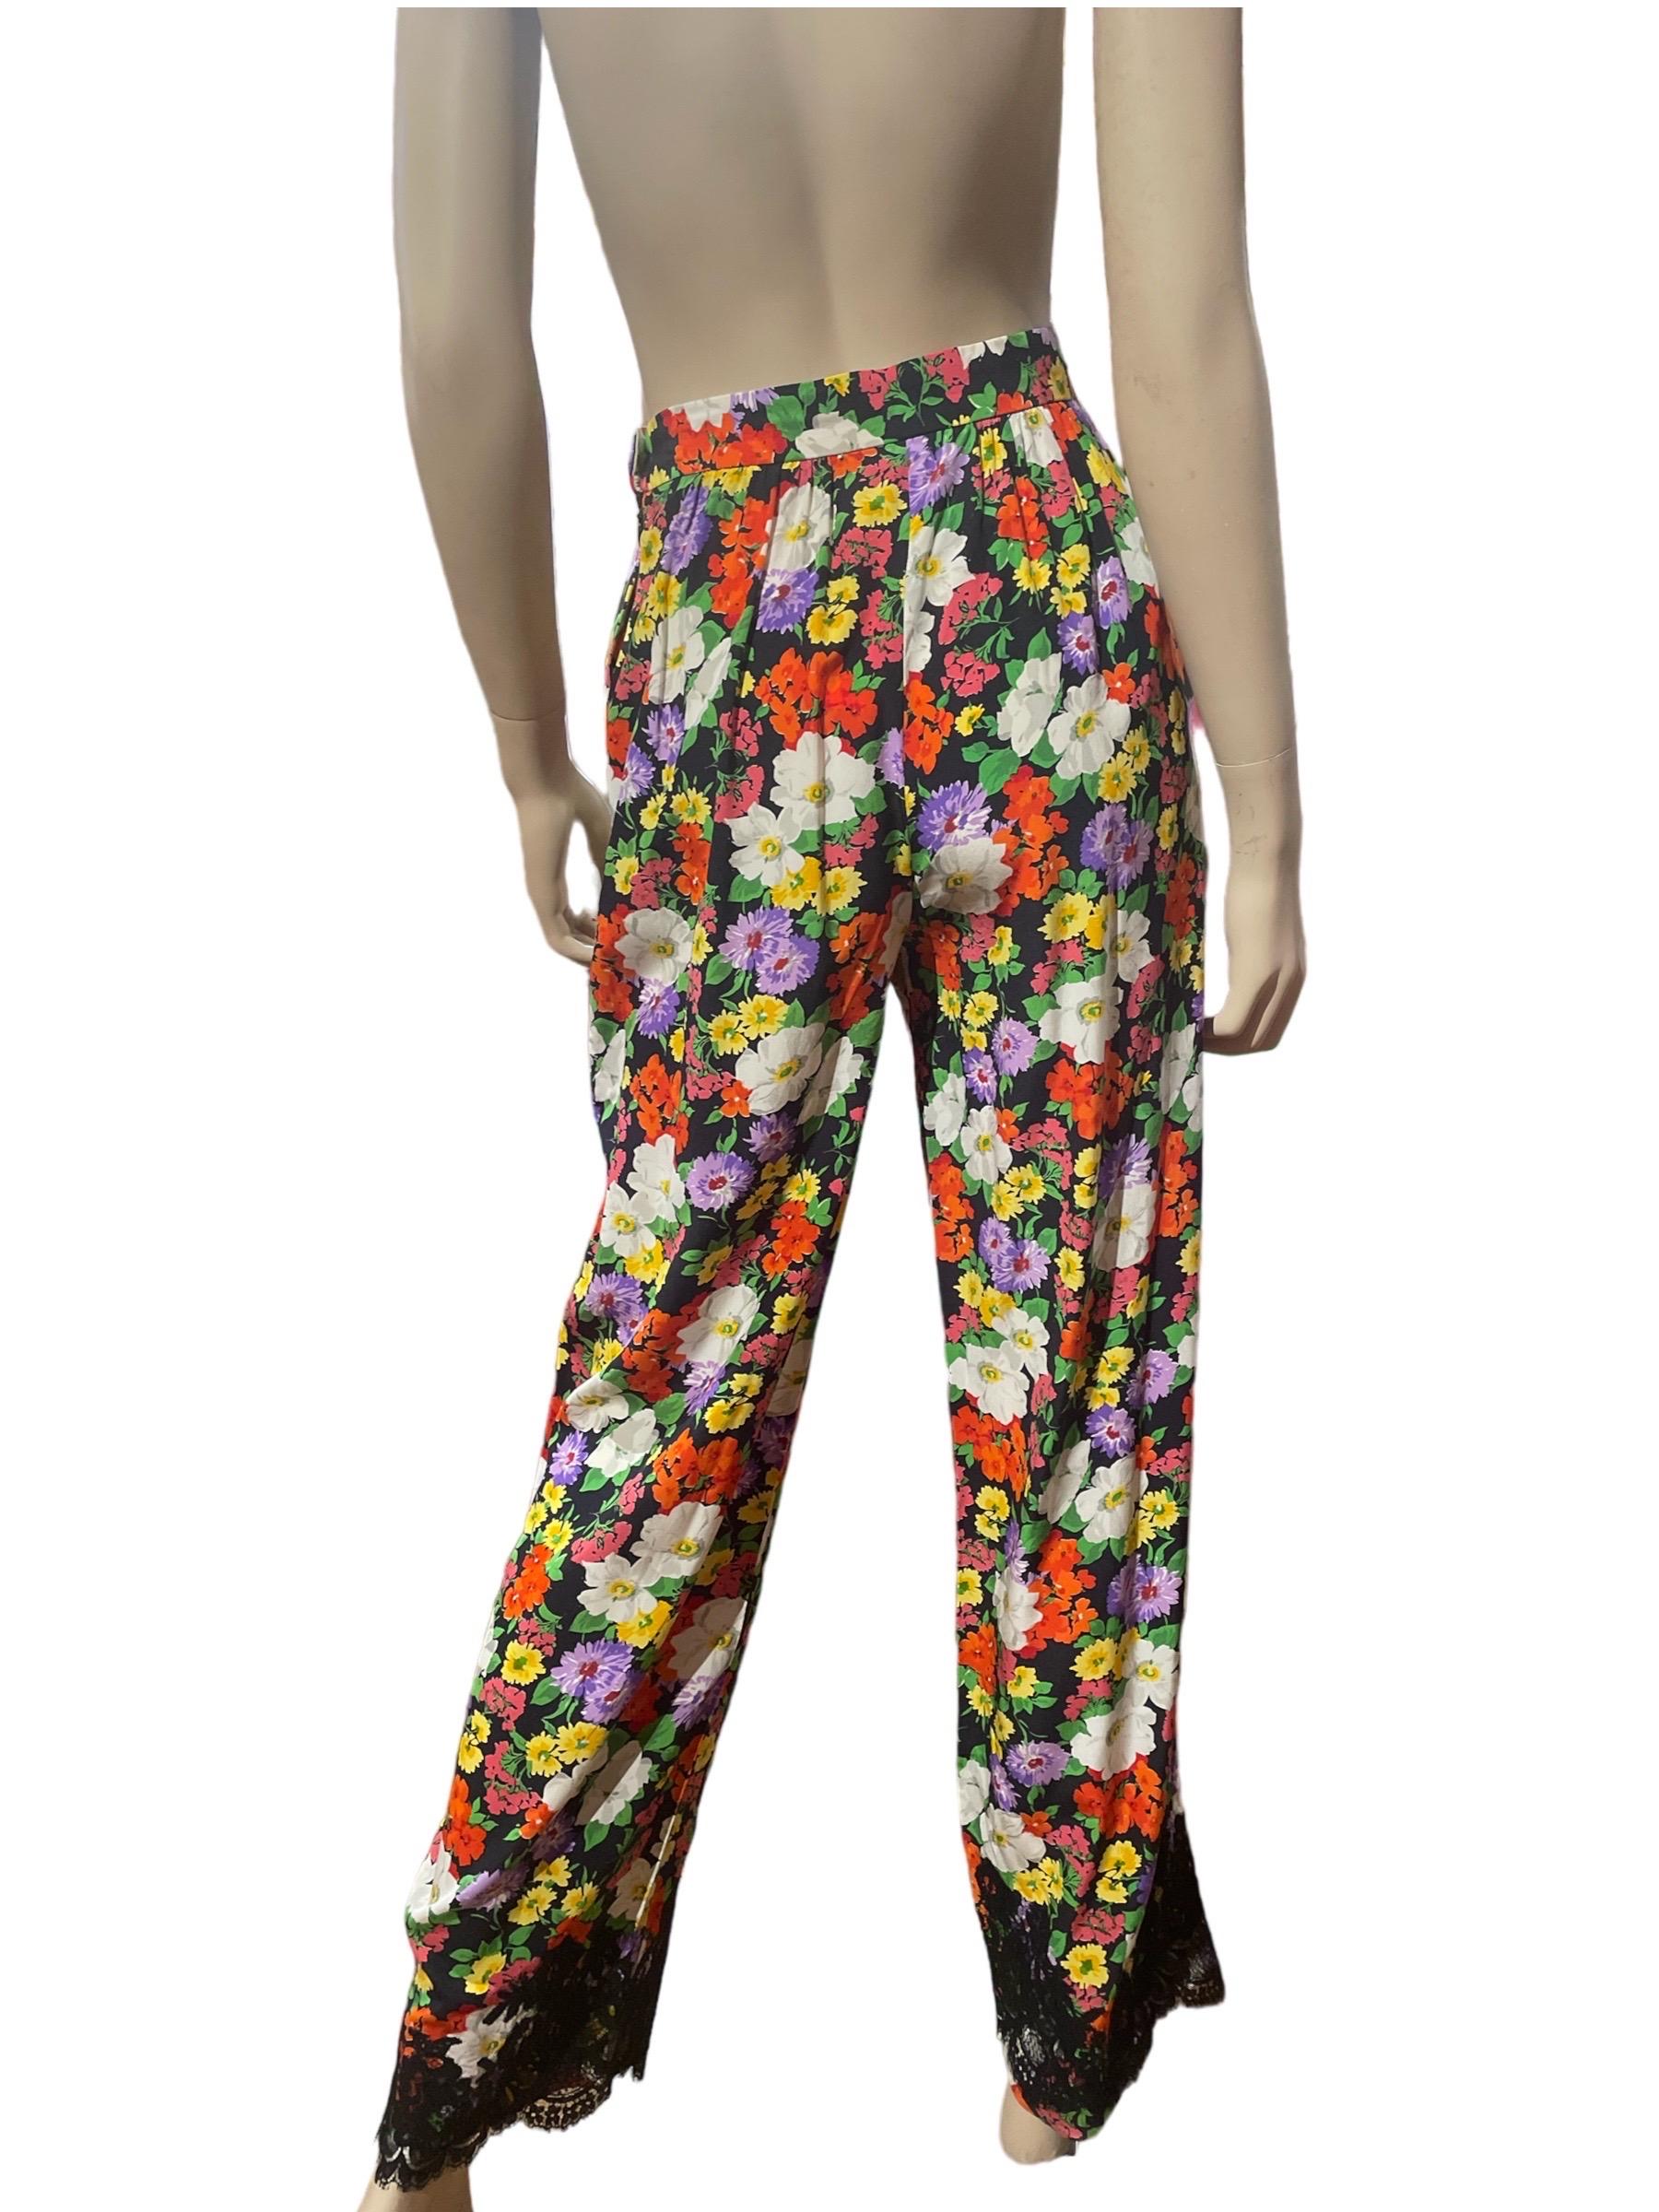 Women's or Men's 1980s Moschino Couture Floral Garden Pants w/ Black Lace Trim